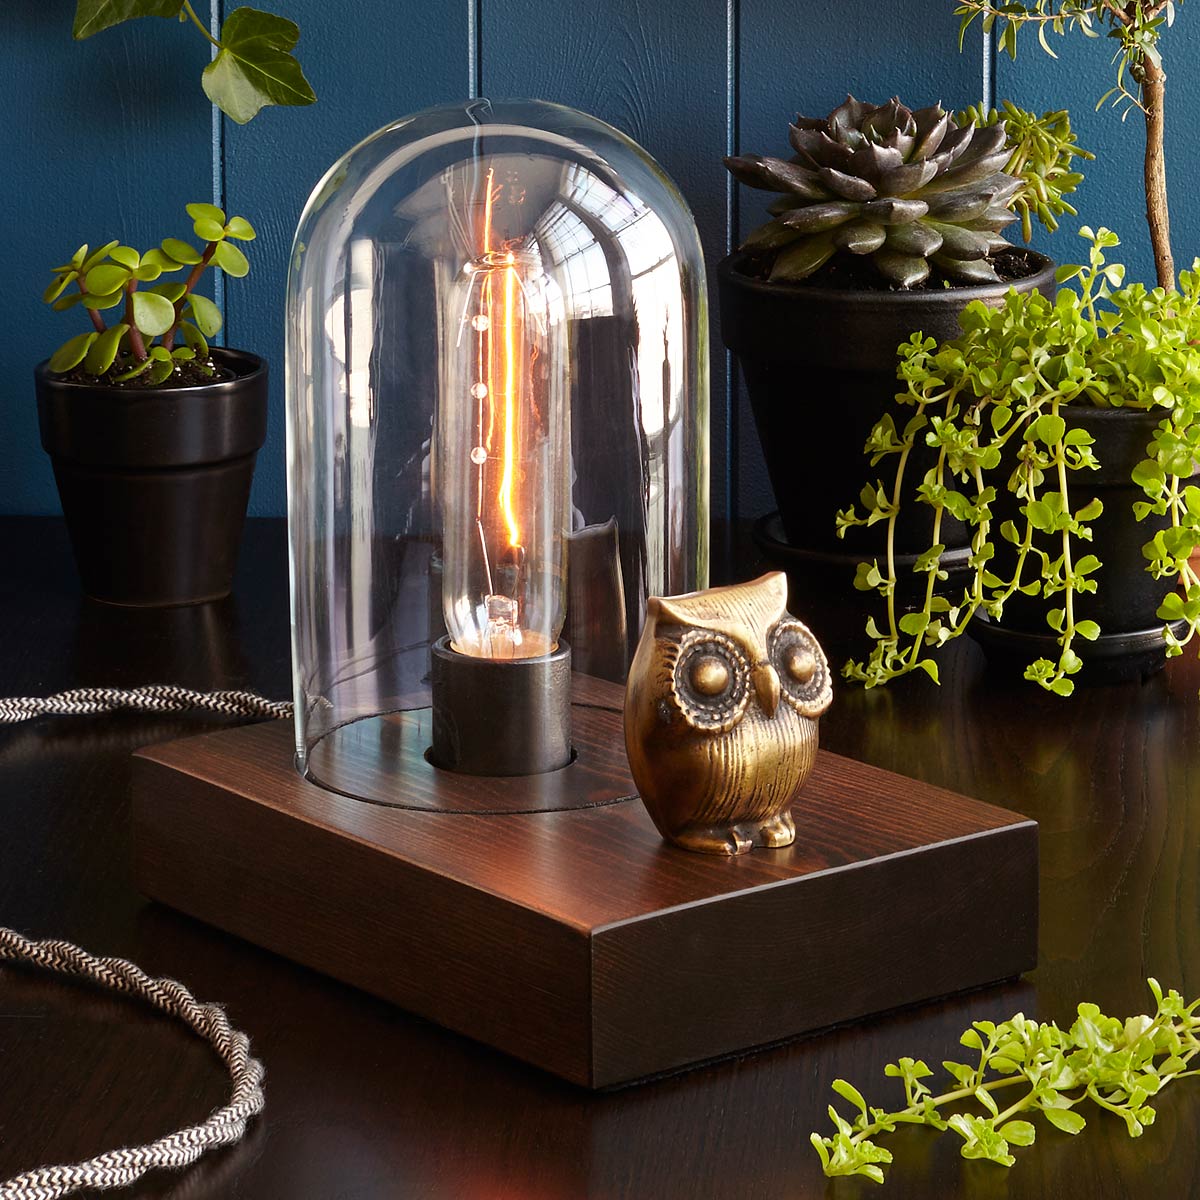 Mr. Owl Touch Lamp | UncommonGoods